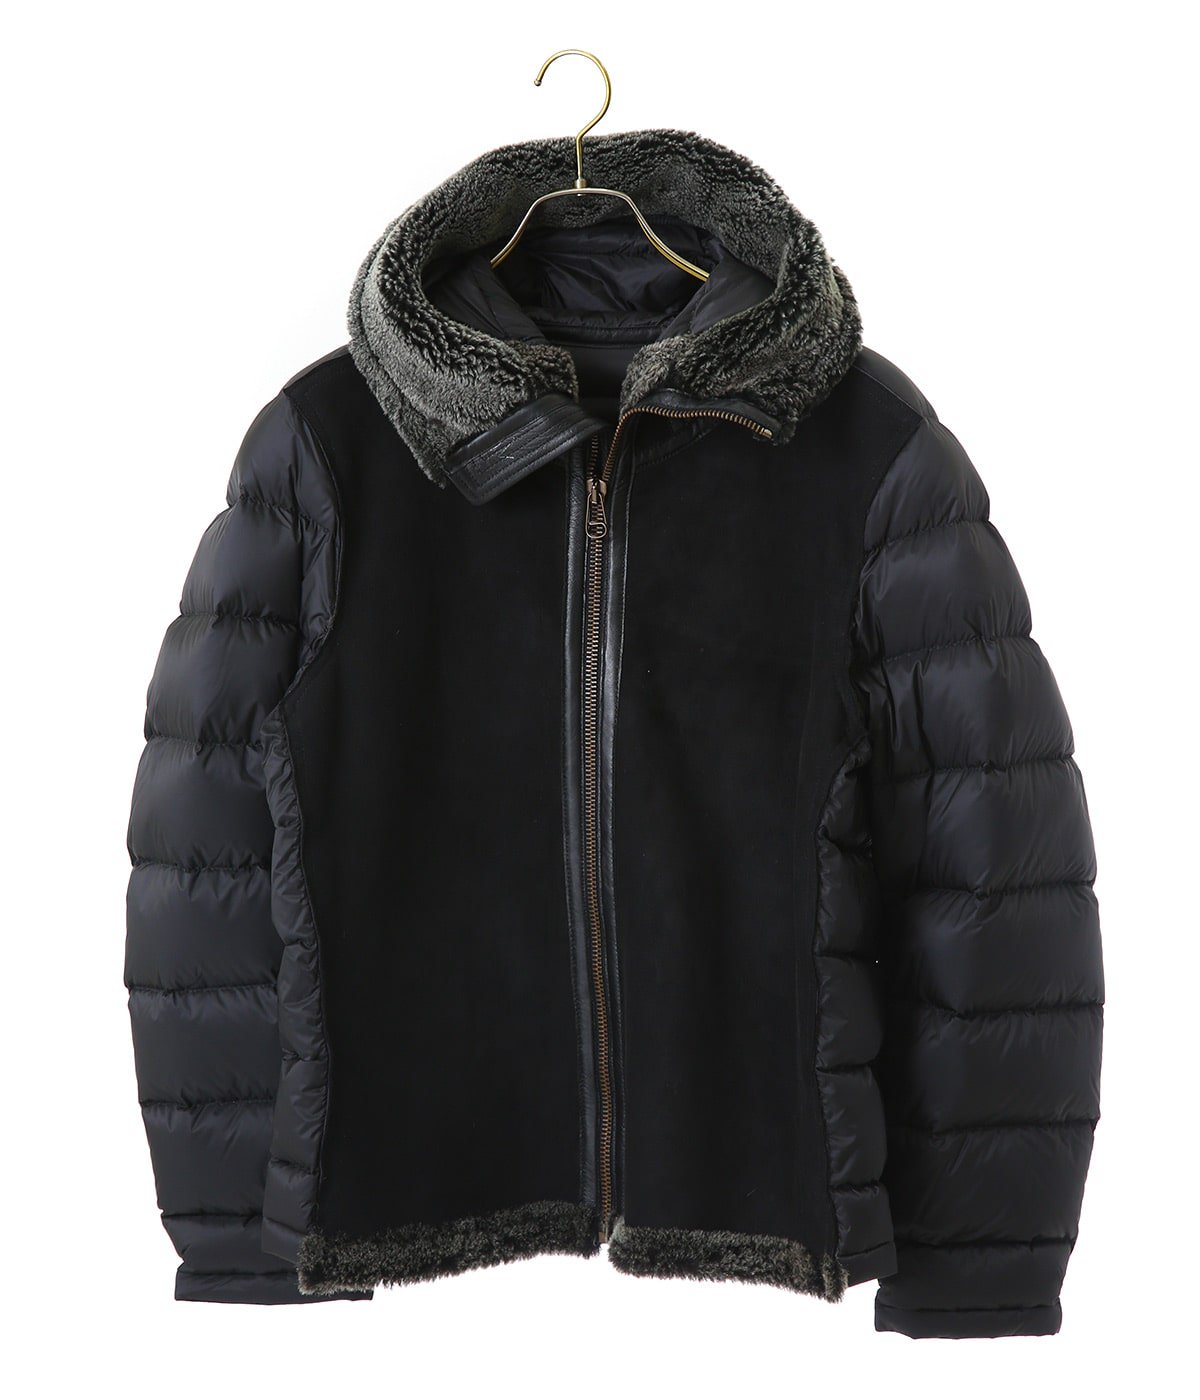 SHEARLING HOODED LINER WITH POCKET SHEARLING | Ten c(テンシー 